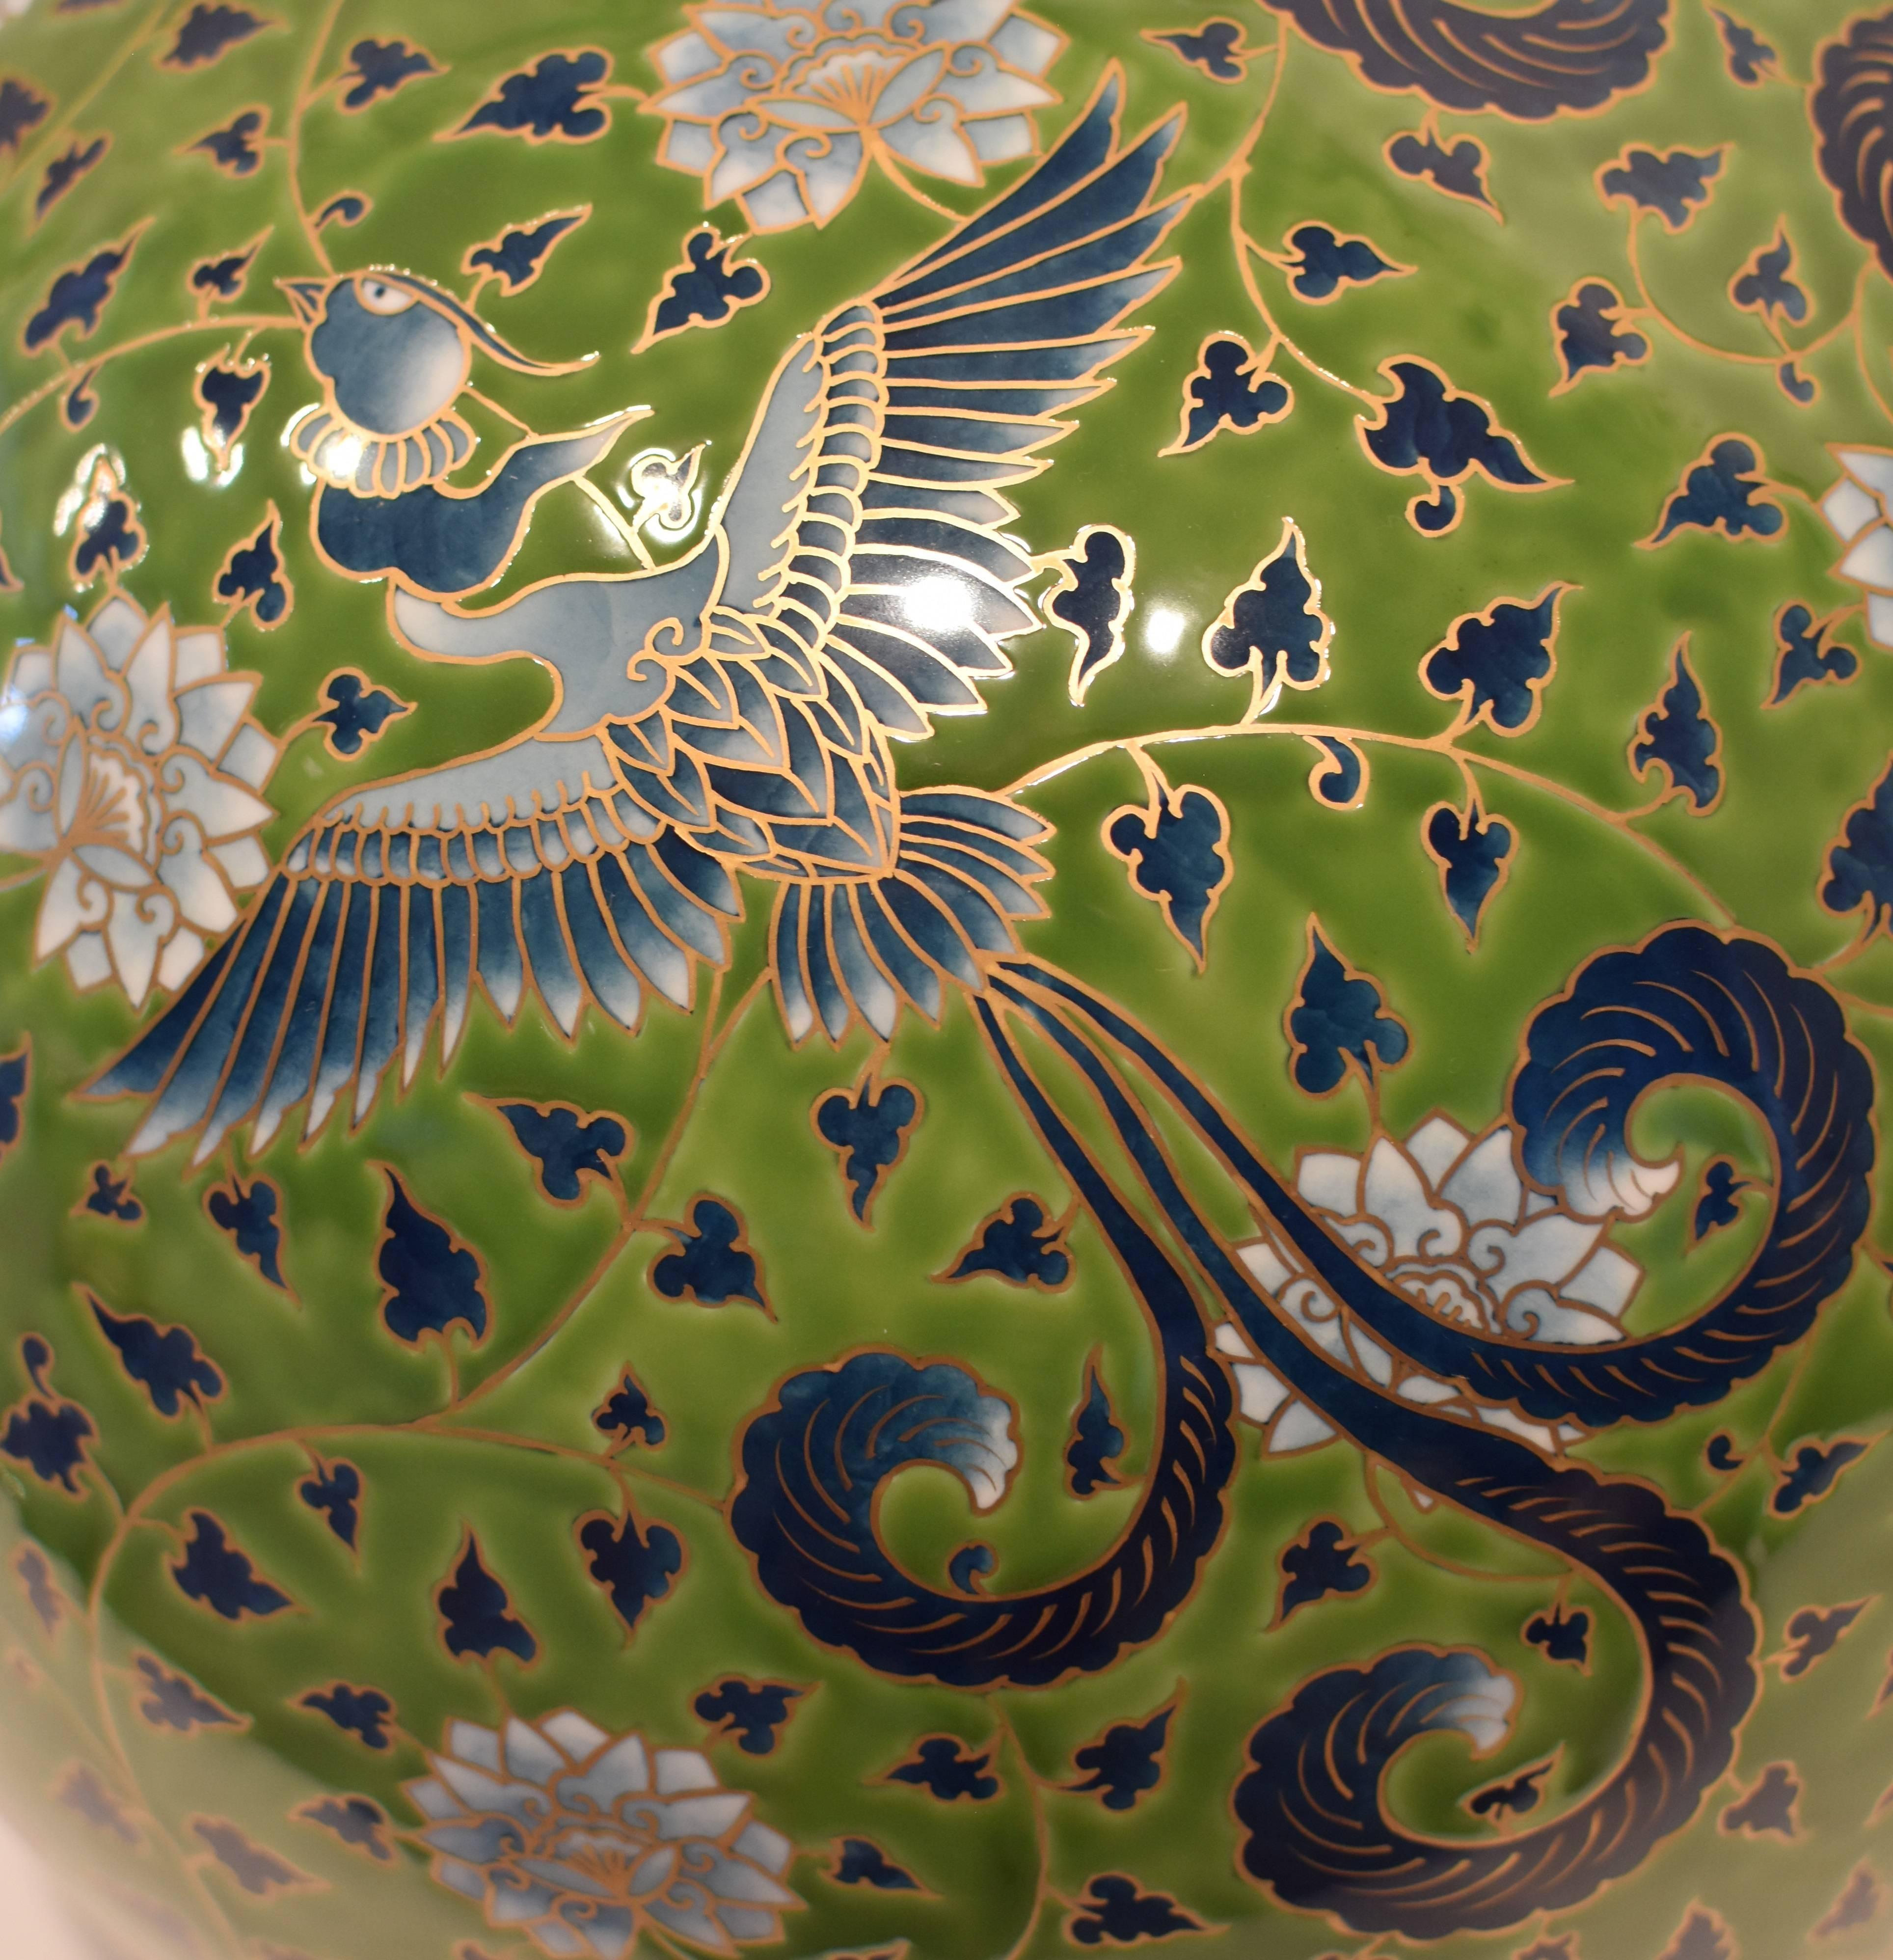 Extraordinary very large contemporary decorative porcelain vase presented in a striking globular form combining the artist's signature auspicious arabesque motif, extremely intricately hand-painted with birds and flowers set against a luminous green